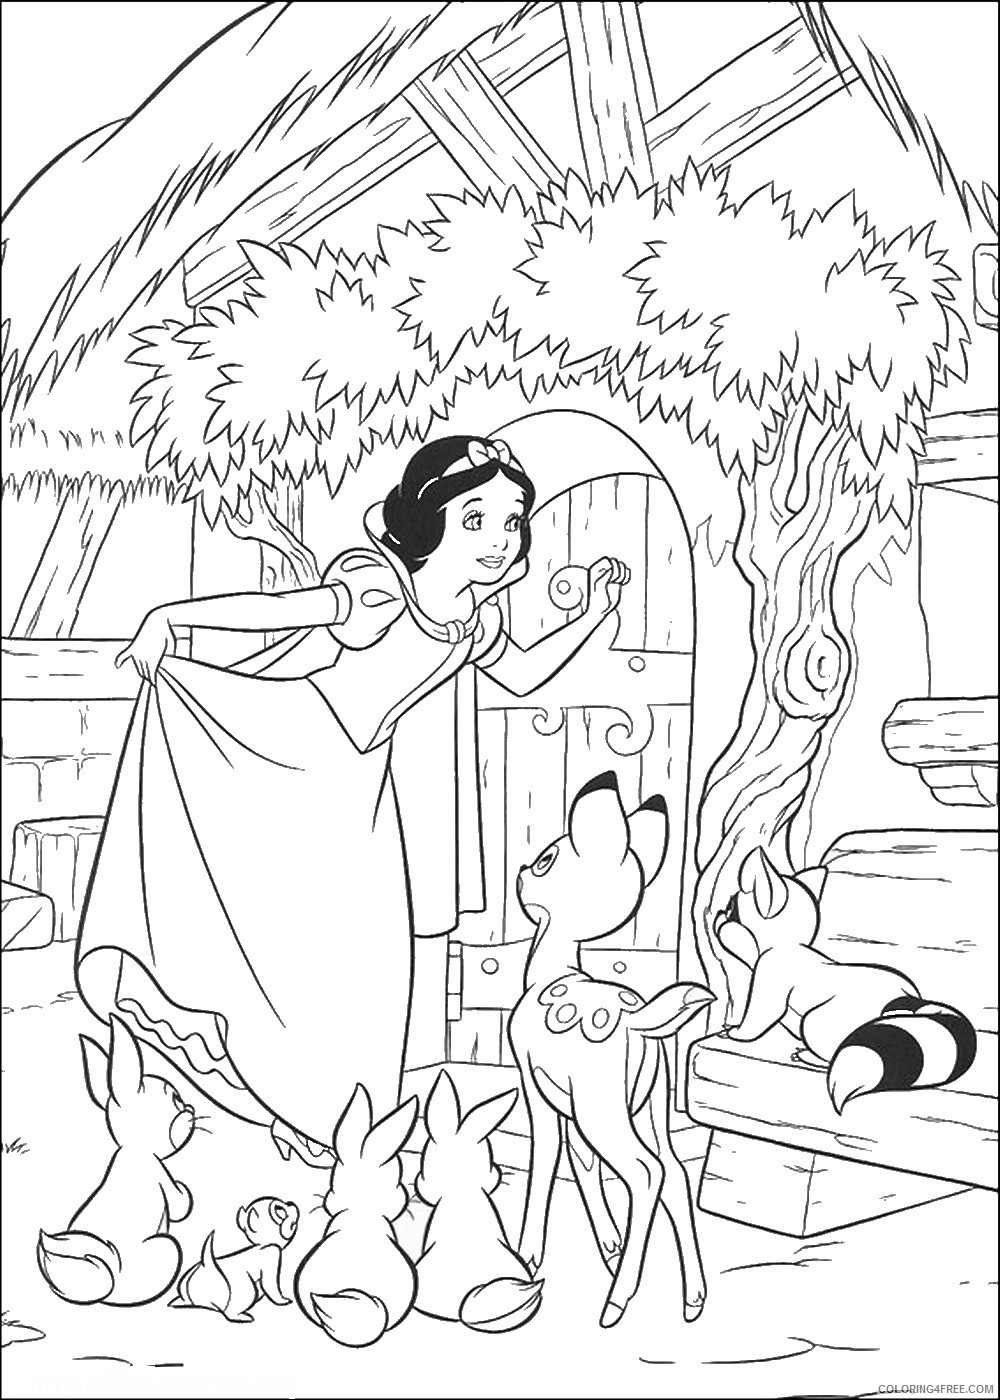 Snow White Coloring Pages Cartoons Snow White Cl 44 Printable 2020 5732 Coloring4free Coloring4free Com